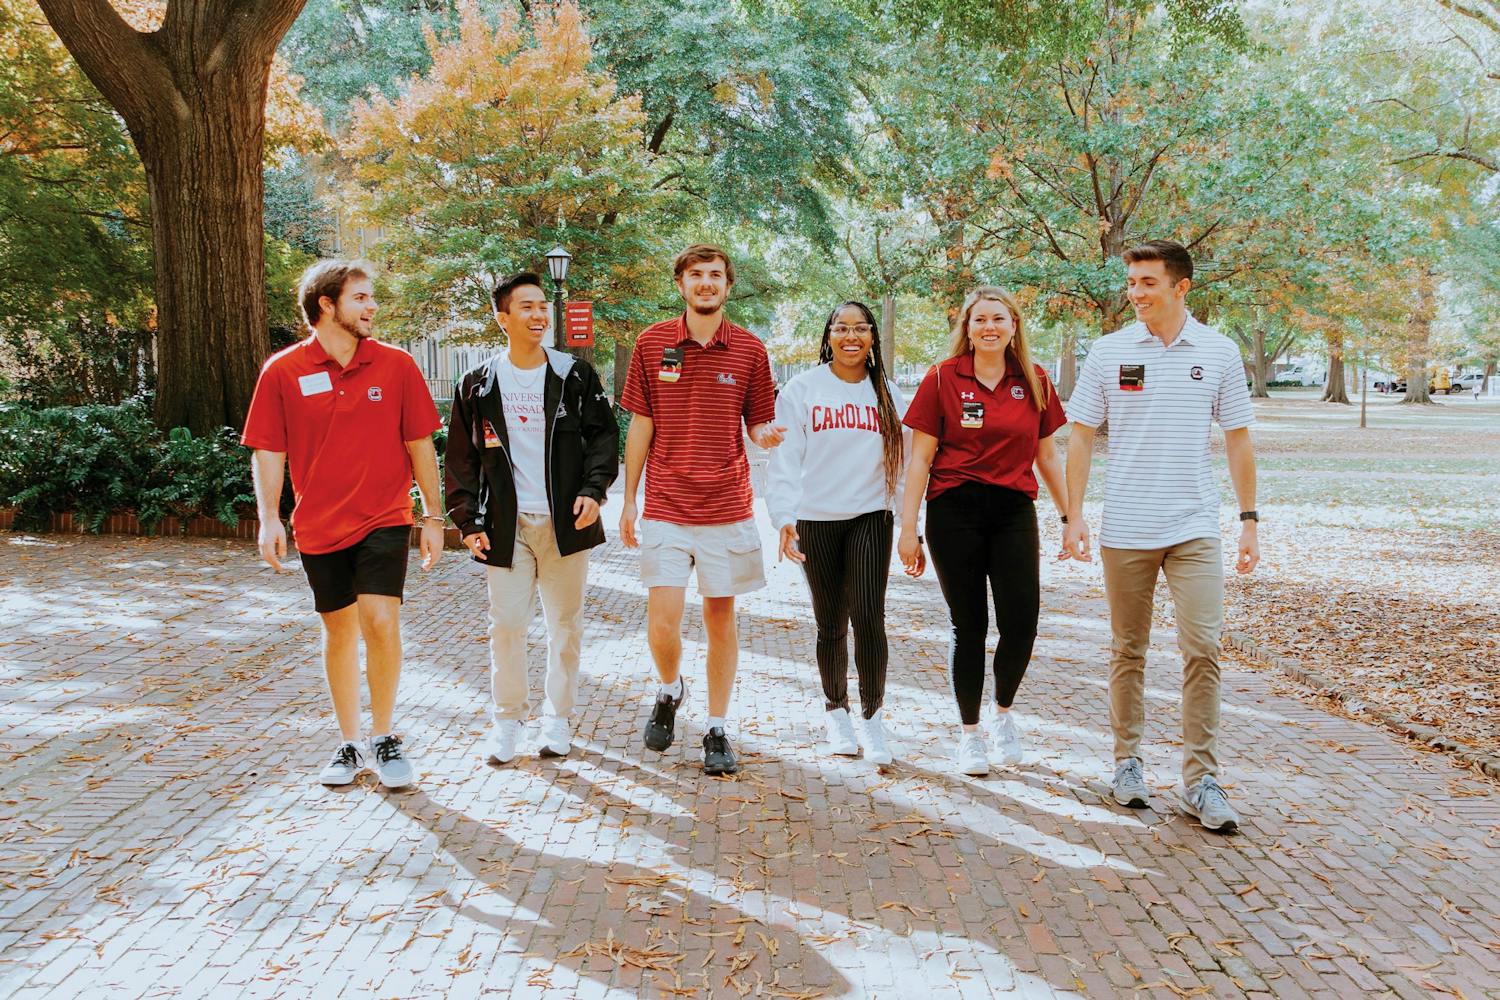 Members of the University Ambassadors team walk together on the Horseshoe. University Ambassadors help prospective students learn more about being a USC student.